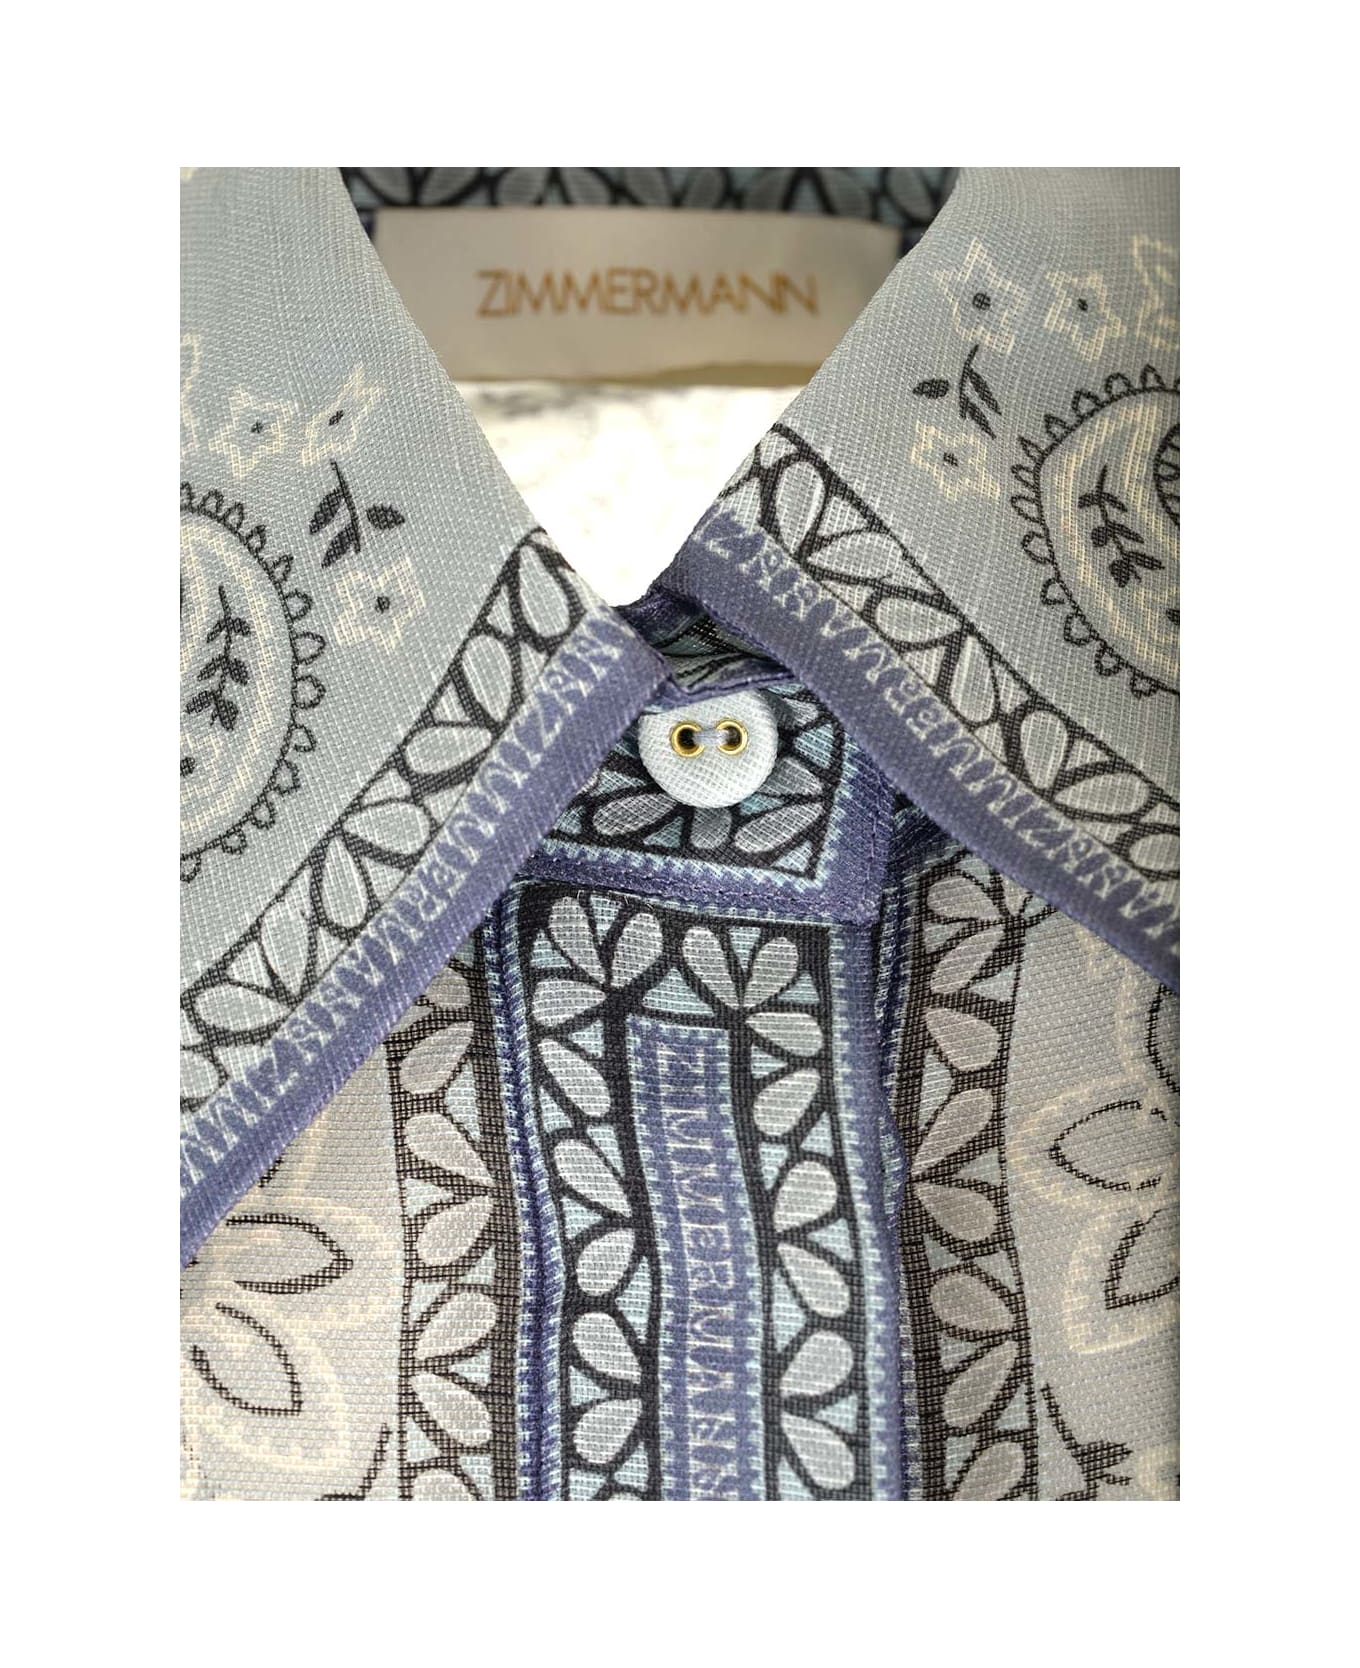 Zimmermann Matchmaker Fitted Blouse - Blue